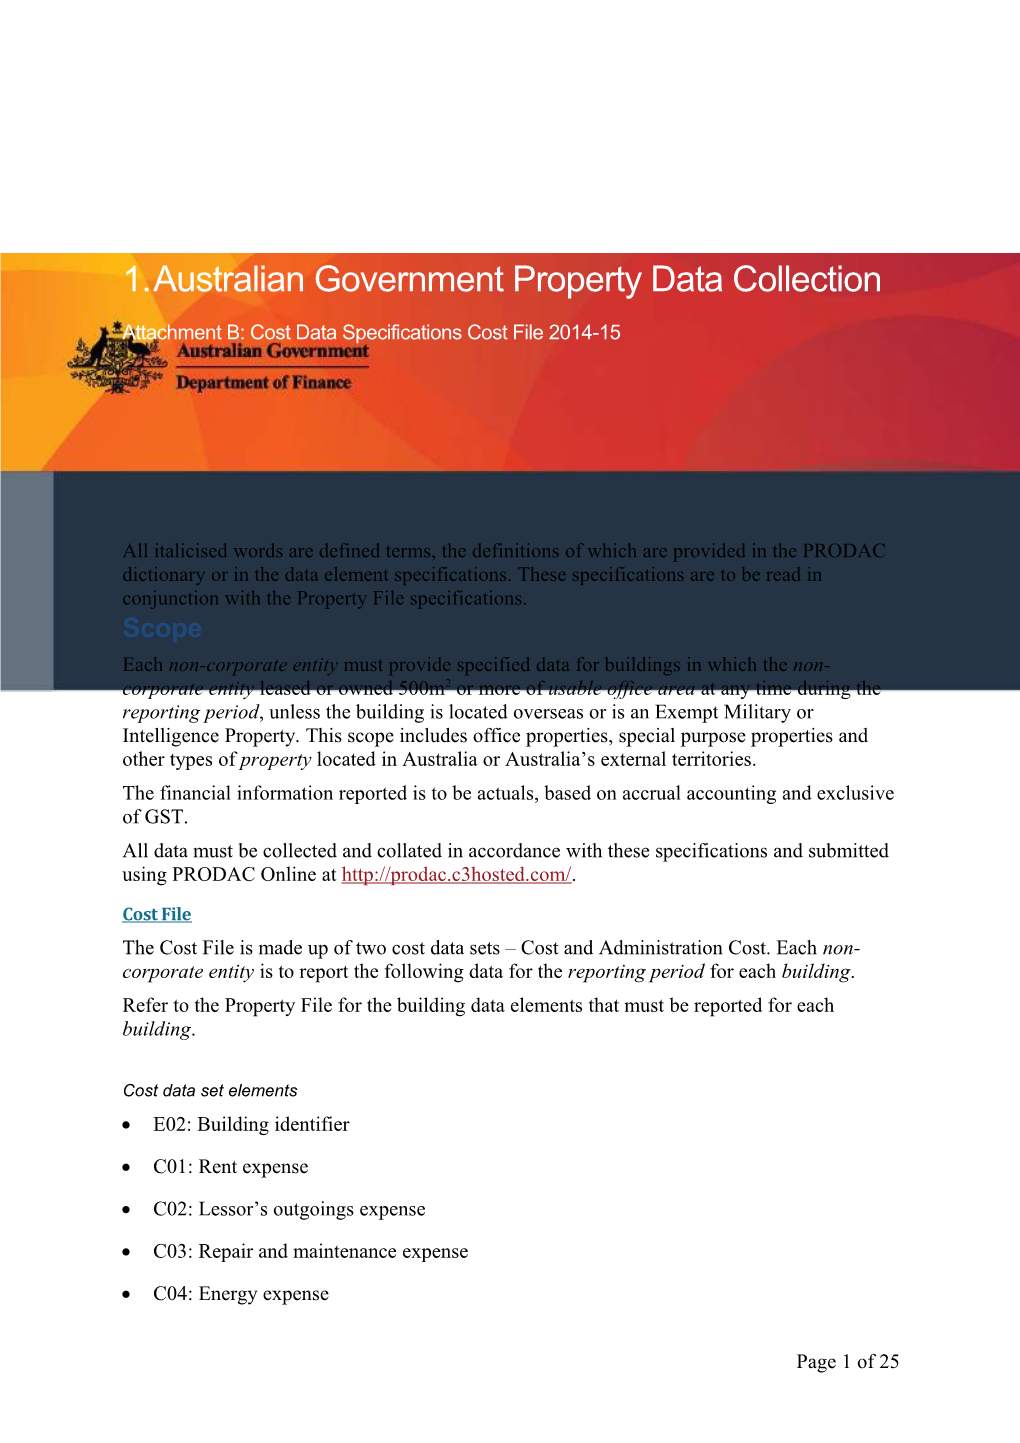 Ustralian Government Property Data Collection